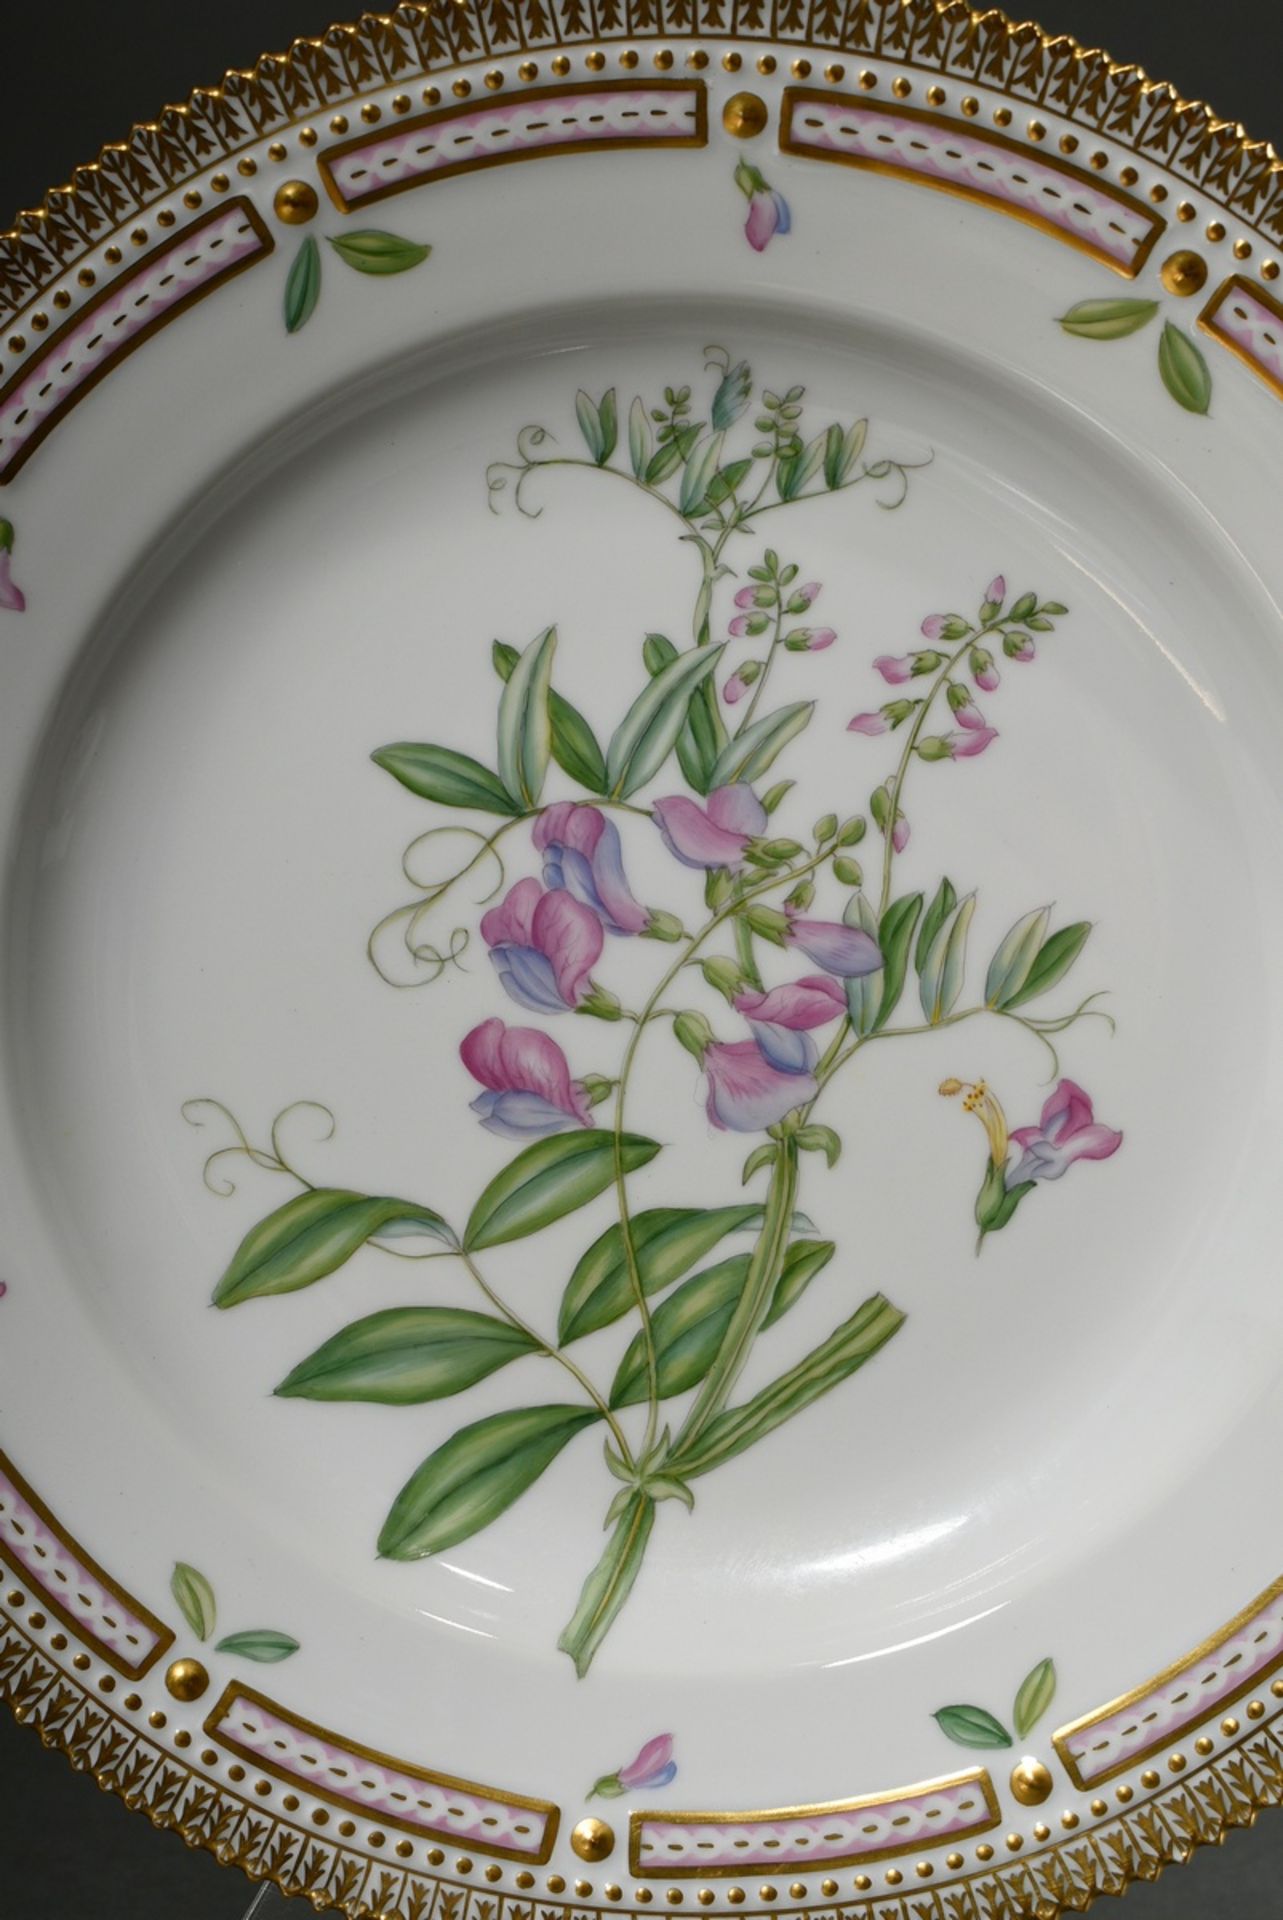 6 Royal Copenhagen "Flora Danica" dinner plates with polychrome painting in the mirror and gold dec - Image 7 of 15